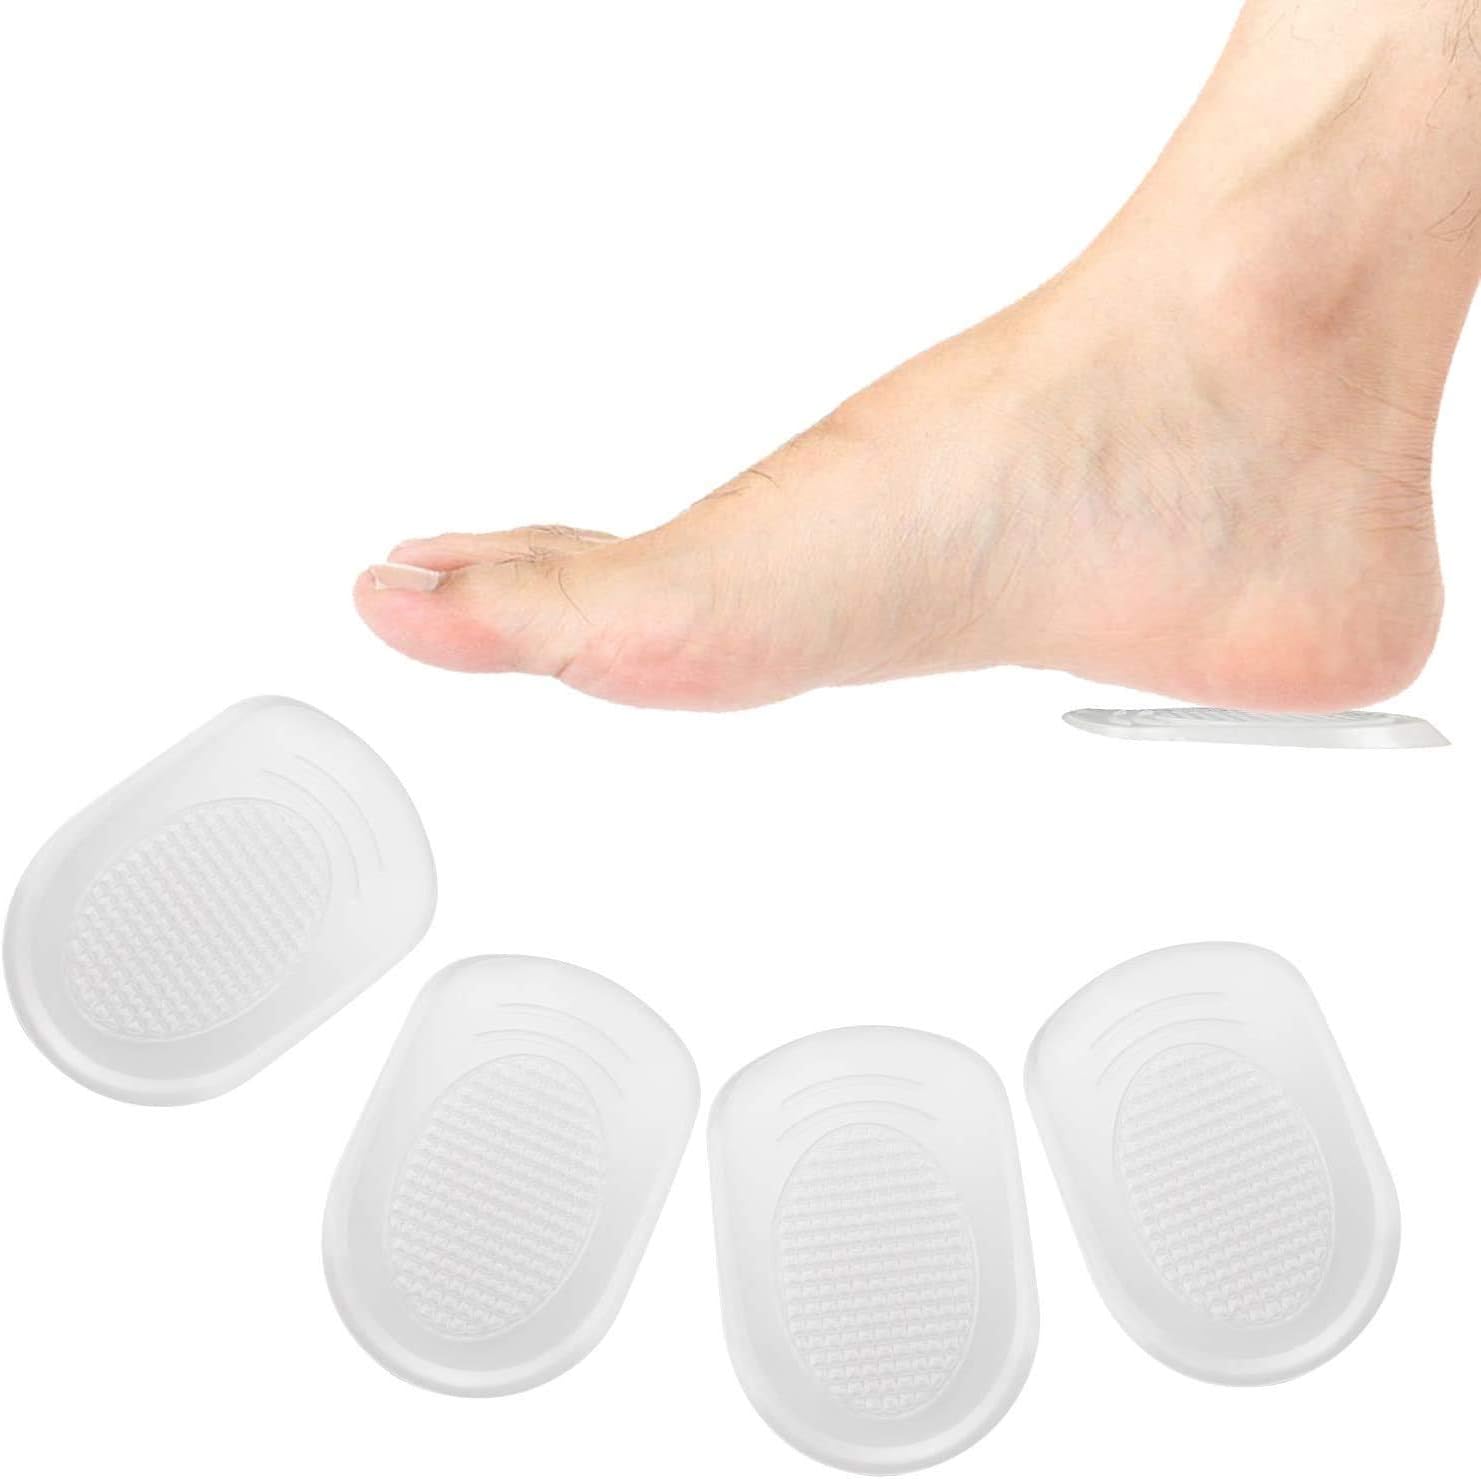 These are perfect! I wear Orthotics and I wanted something for heel pain that wasn't big and thick snd that would accommodate the orthotics. These are just perfect they're thin fit in my shoes well, and the gel gives just the amount of extra comfort that I need. I looked and looked and was so happy to find these!